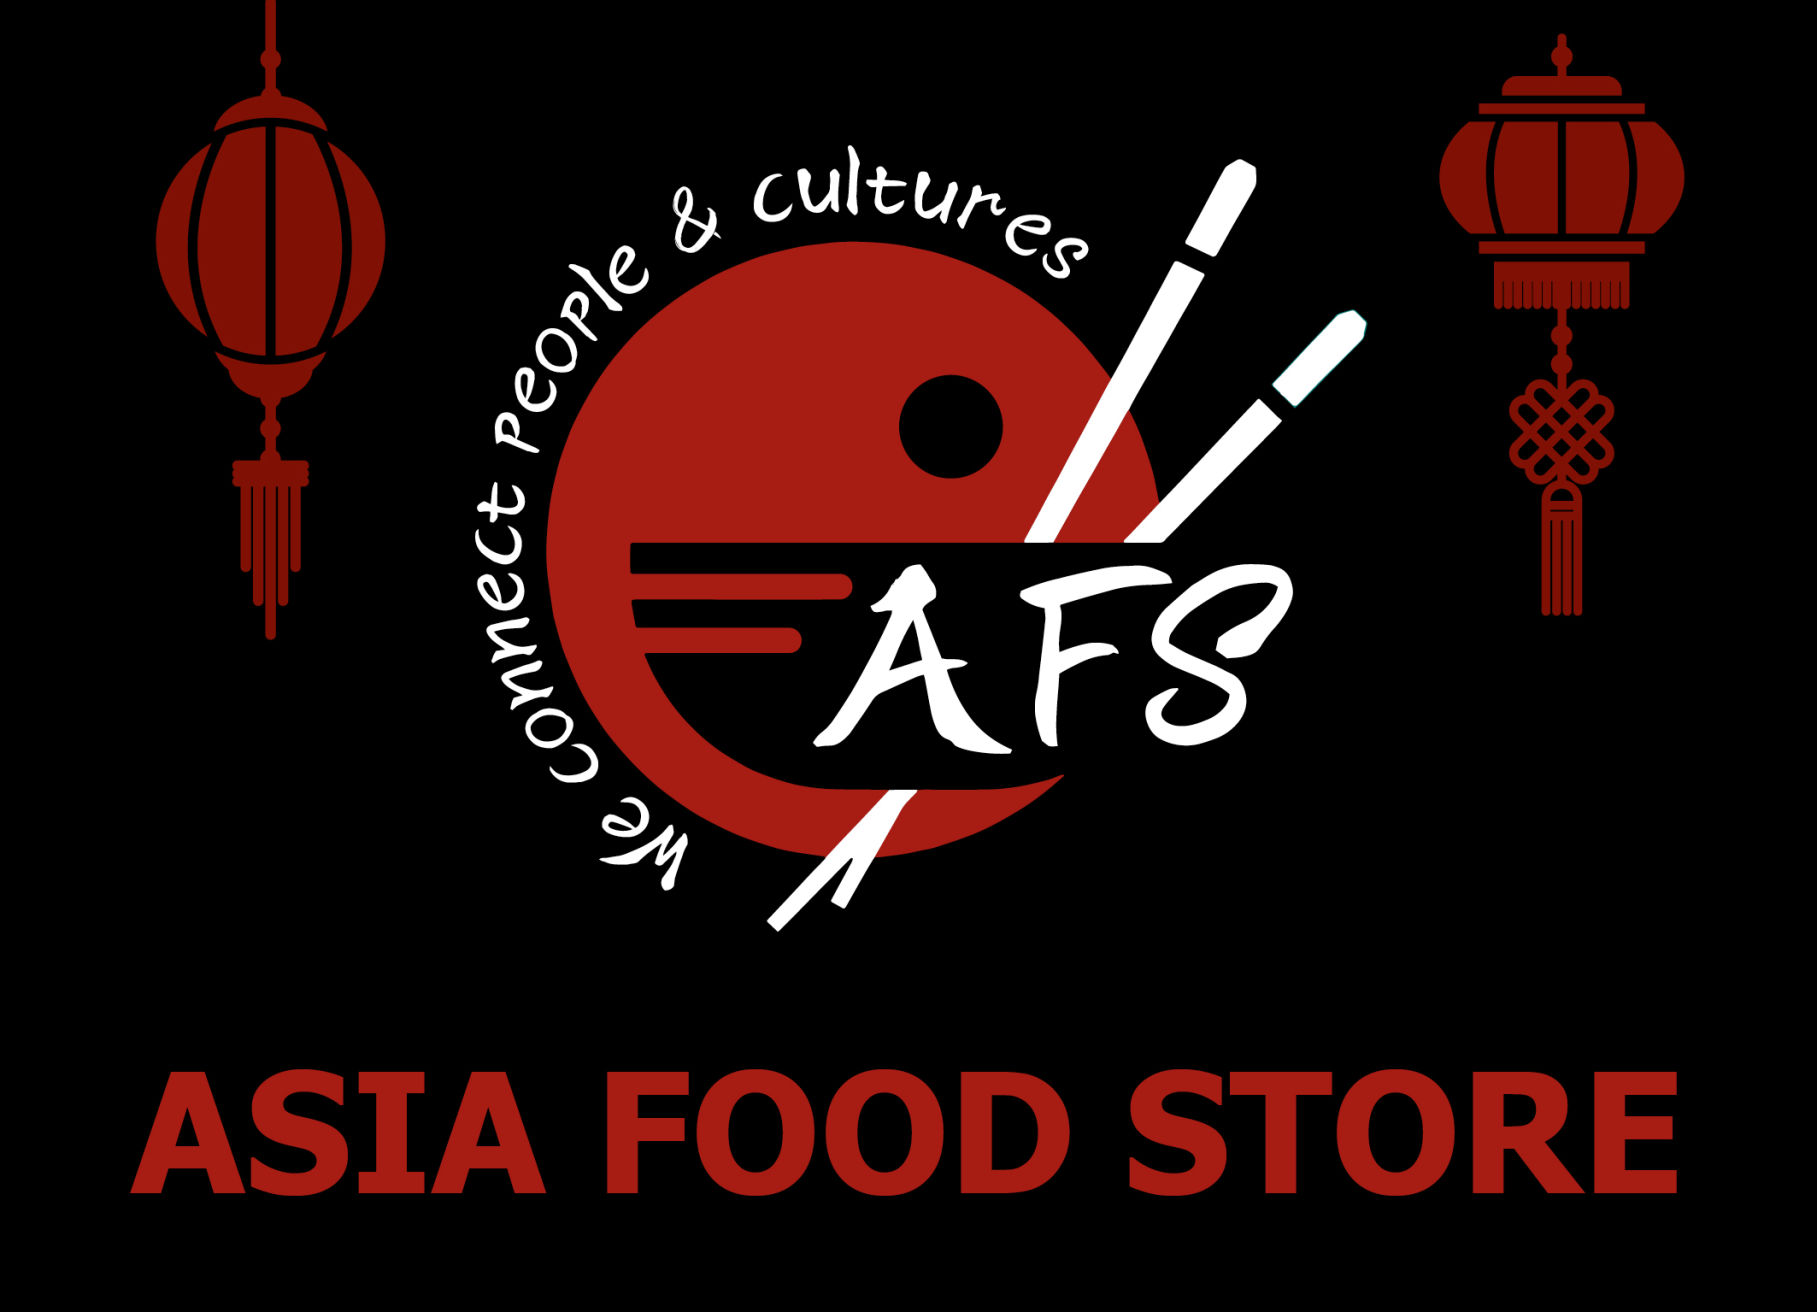 Asia Food Store